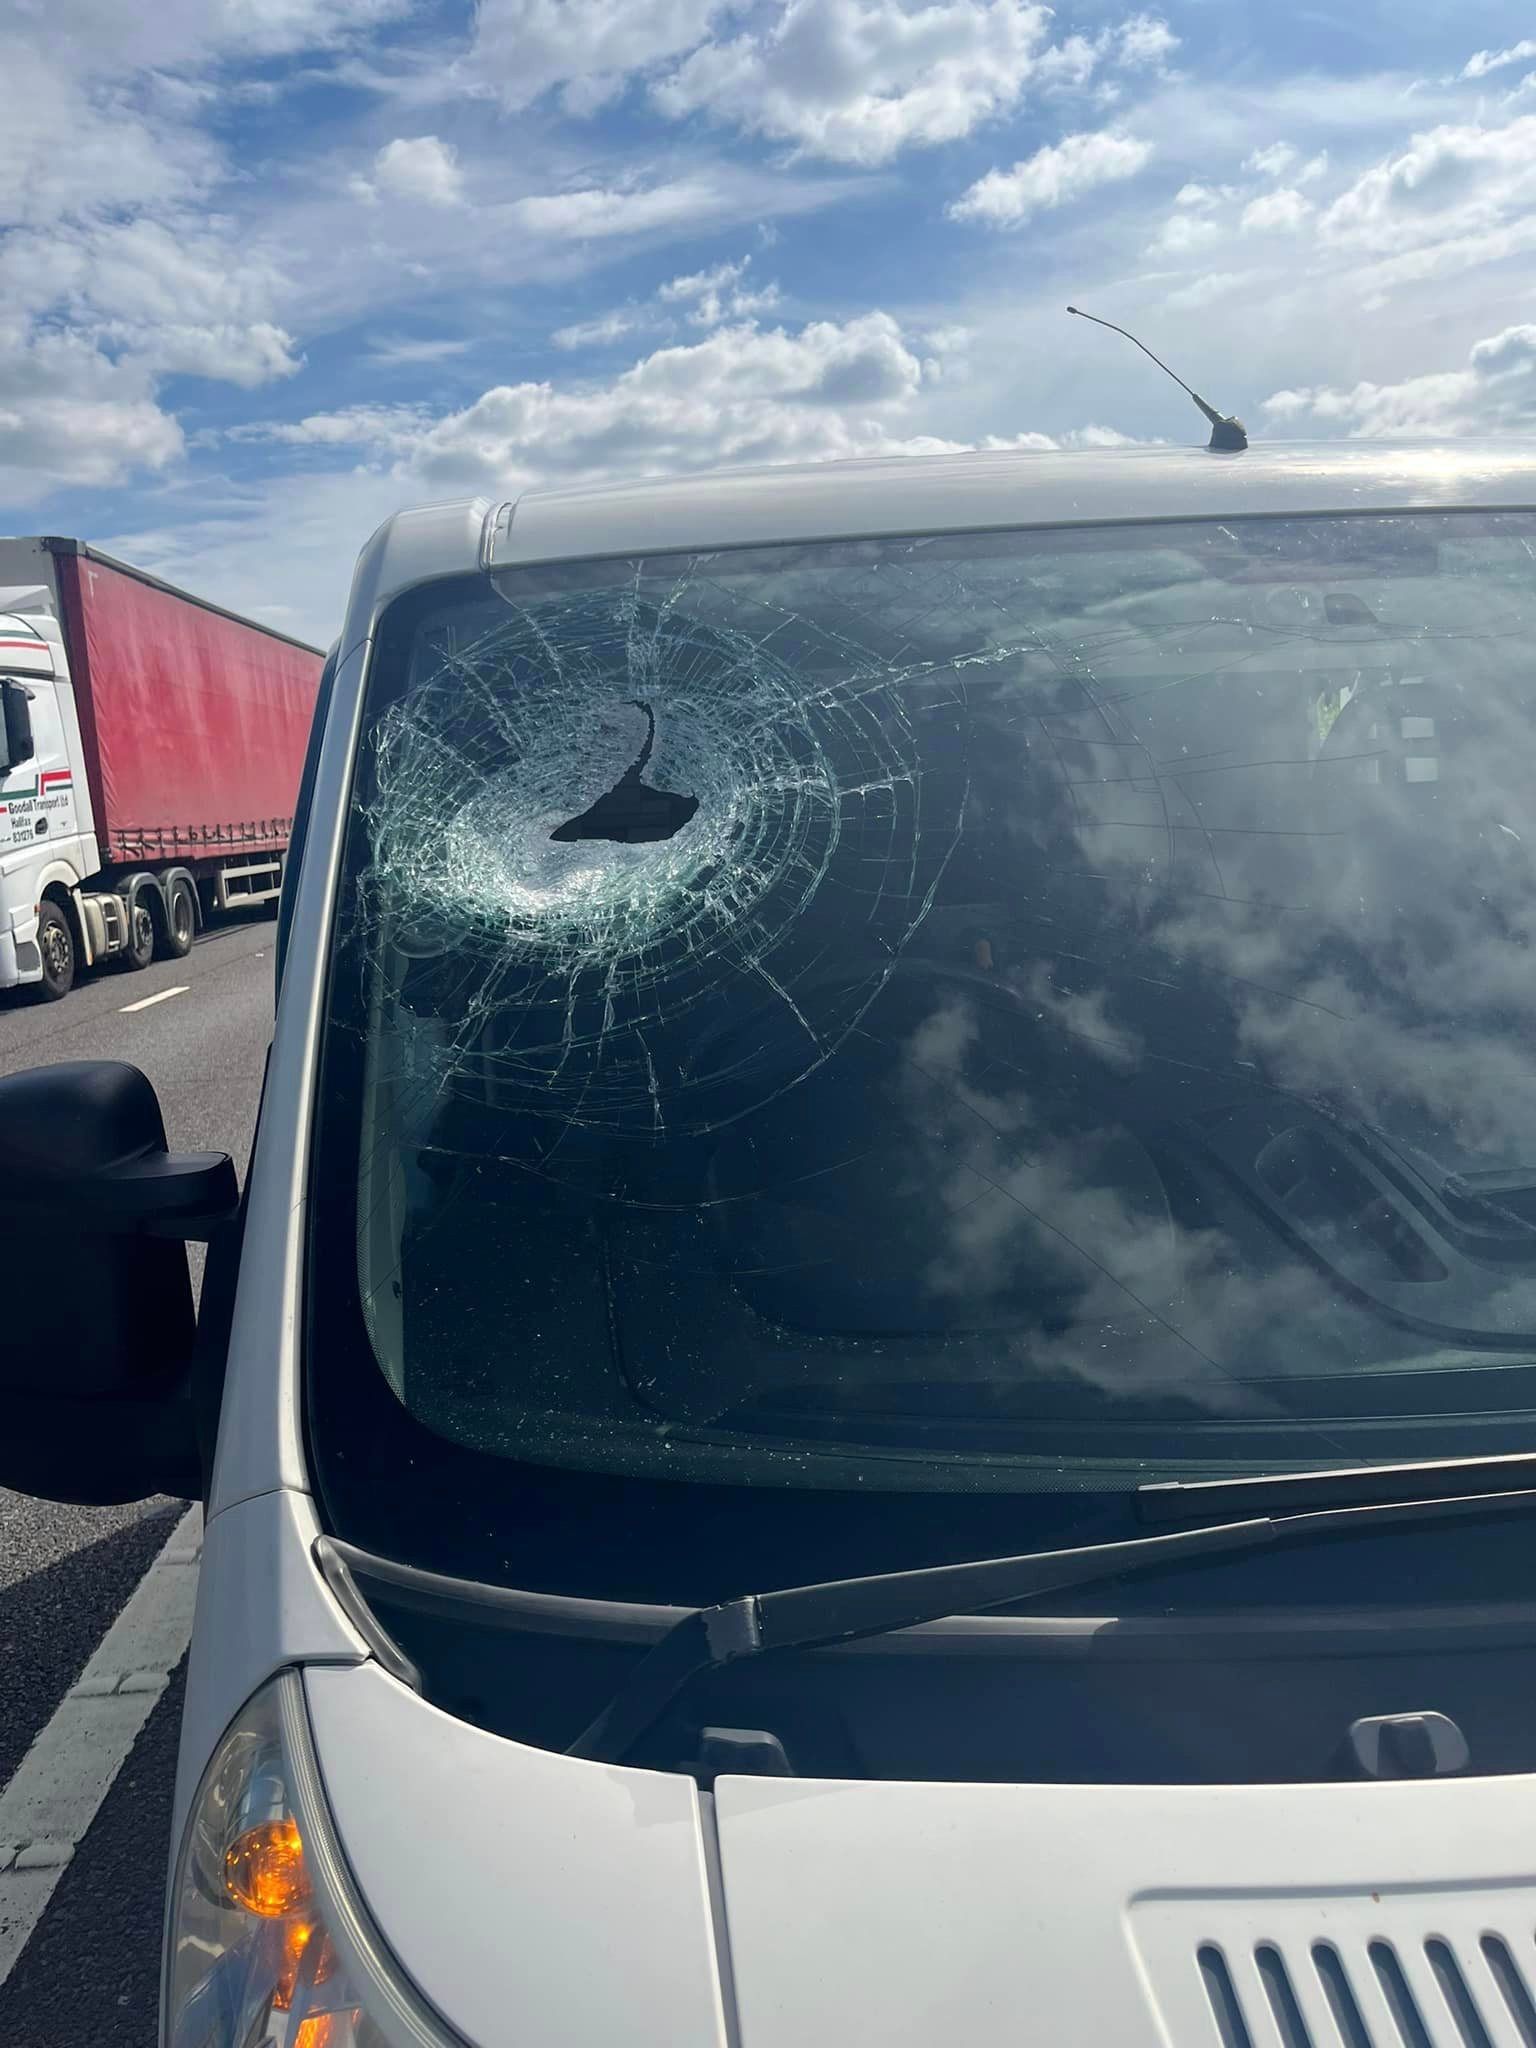 The shattered windscreen